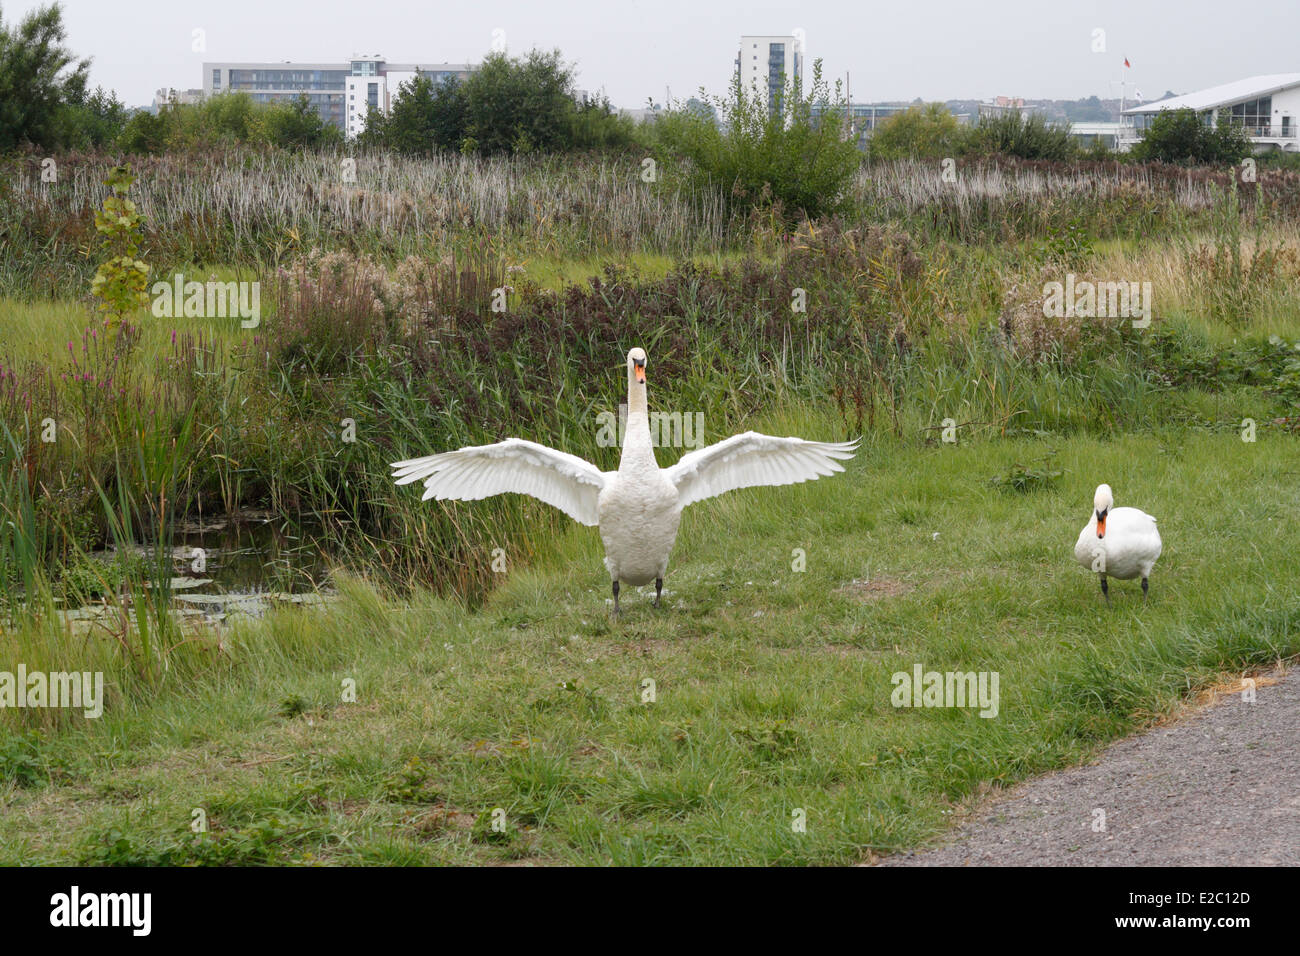 A Swan spreading its wings, Cardiff bay wetland nature reserve, Wales UK Reedbeds urban biodiversity hotspot Stock Photo